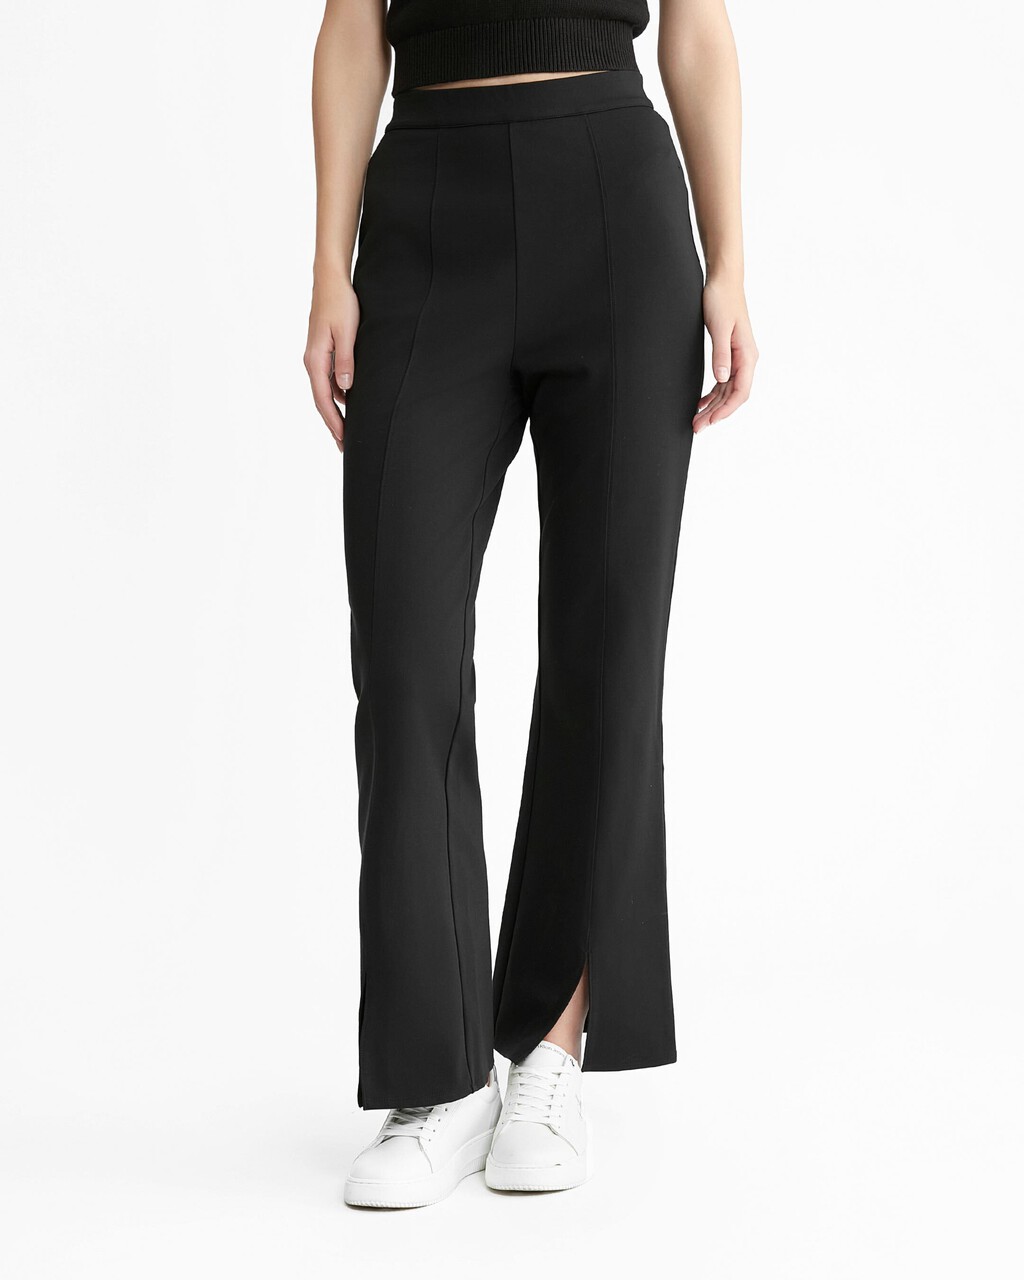 Connected Layers Milano Tapered Flare Pants, Ck Black, hi-res